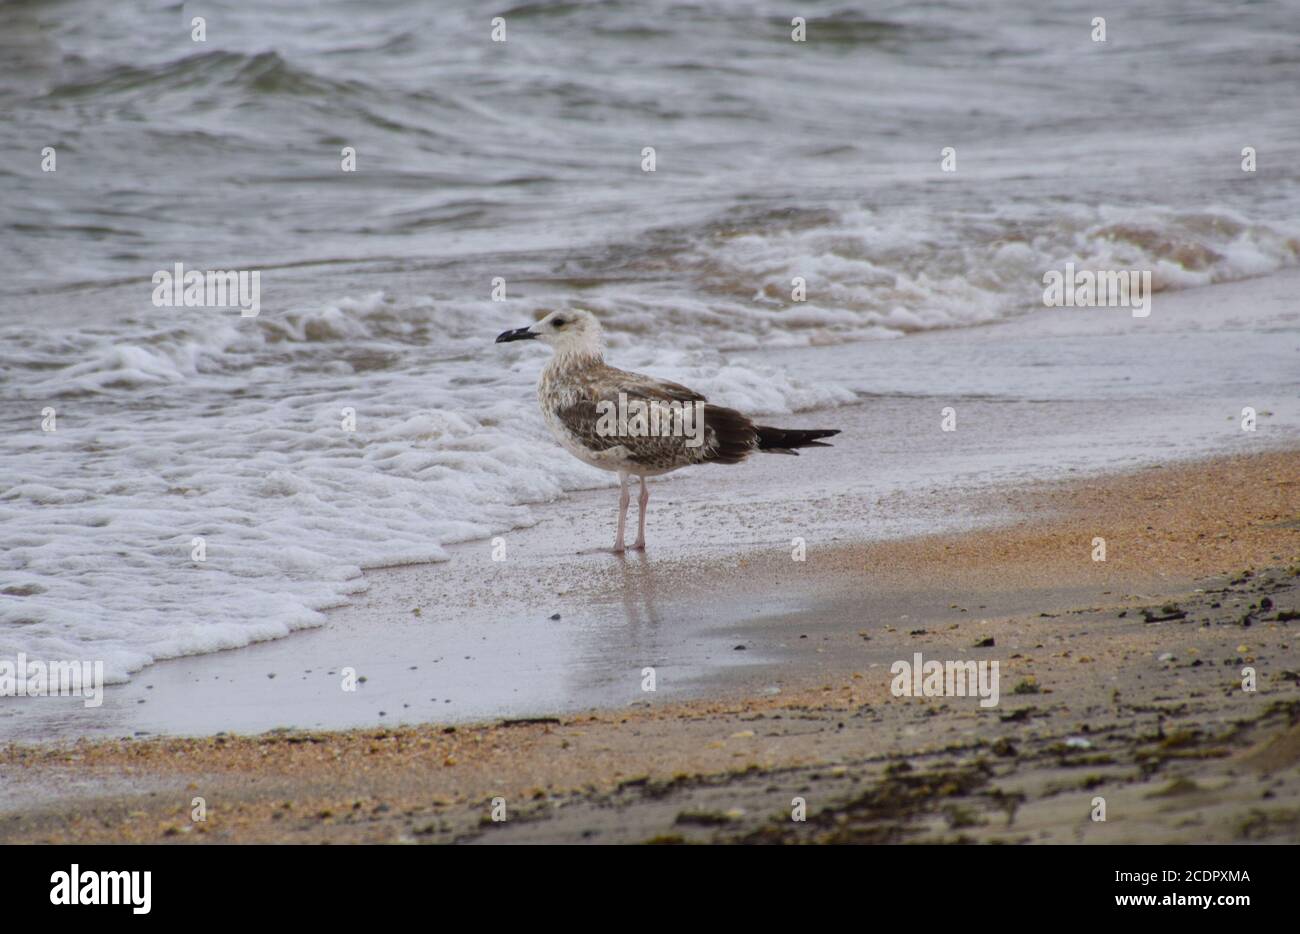 Common gulls on the beach. Seagulls looking for food Stock Photo